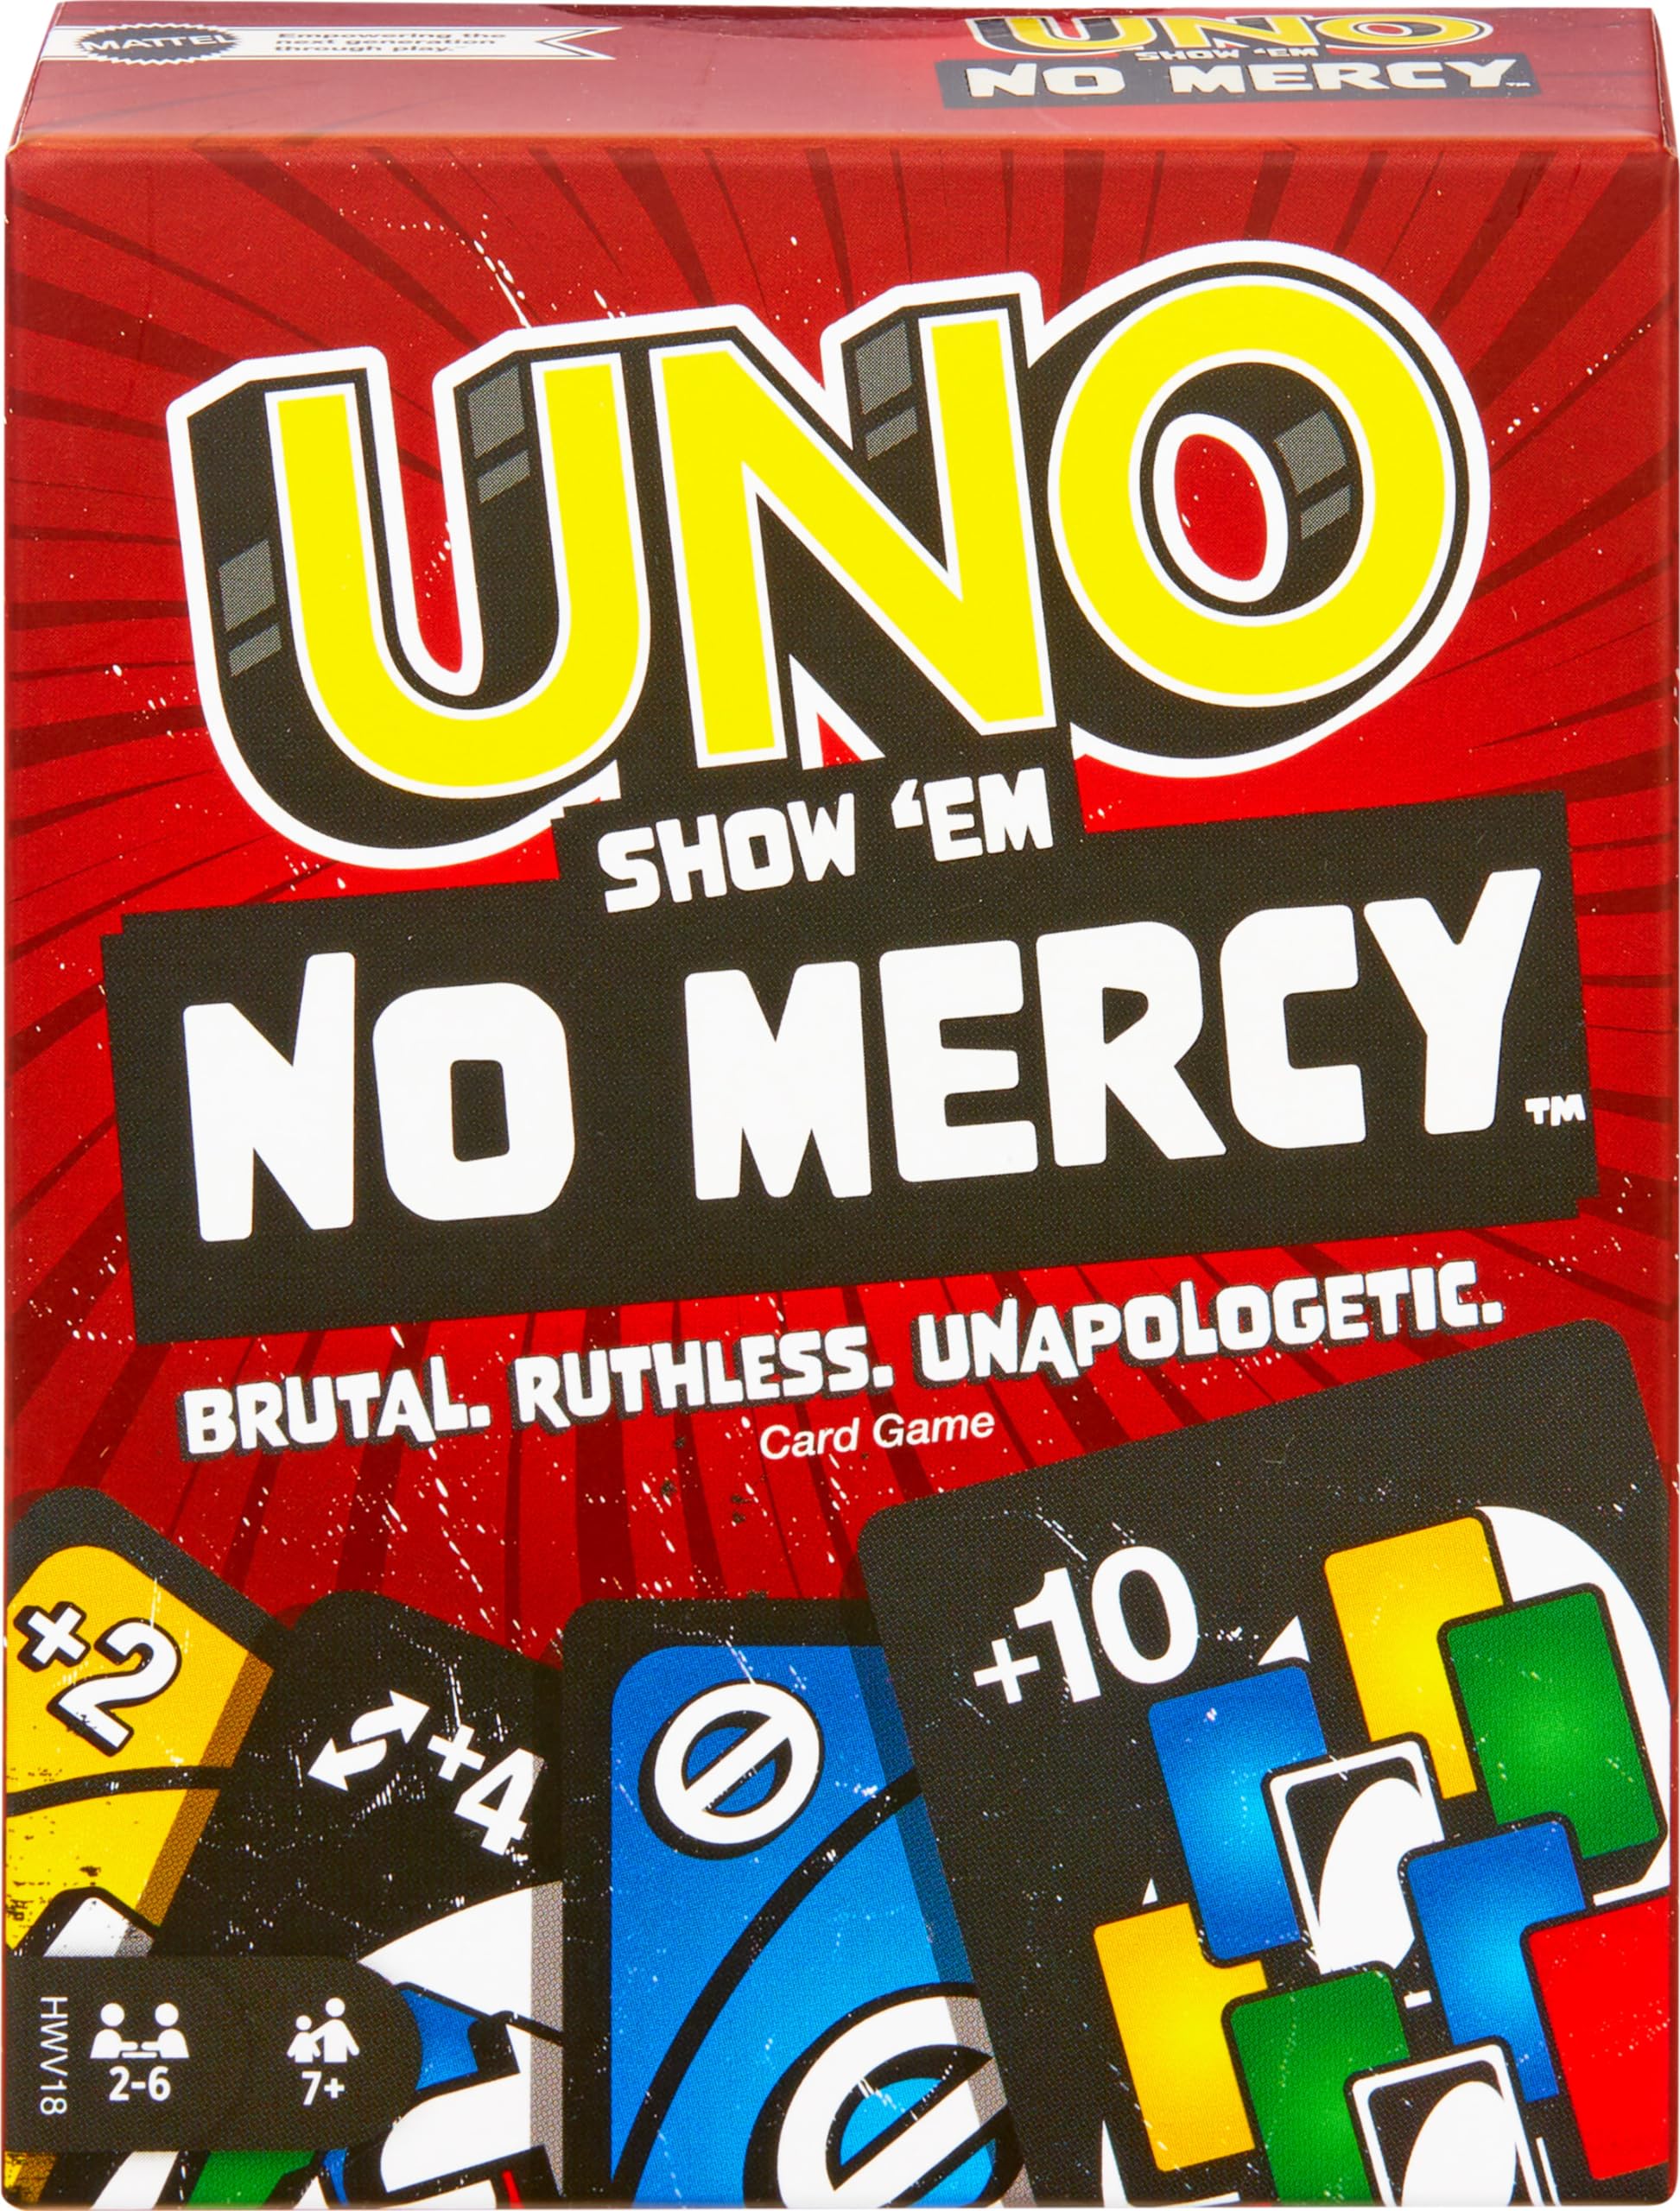 Mattel UNO Show ‘em No Mercy Card Game $9.50 + Free Shipping w/ Prime or on $35+